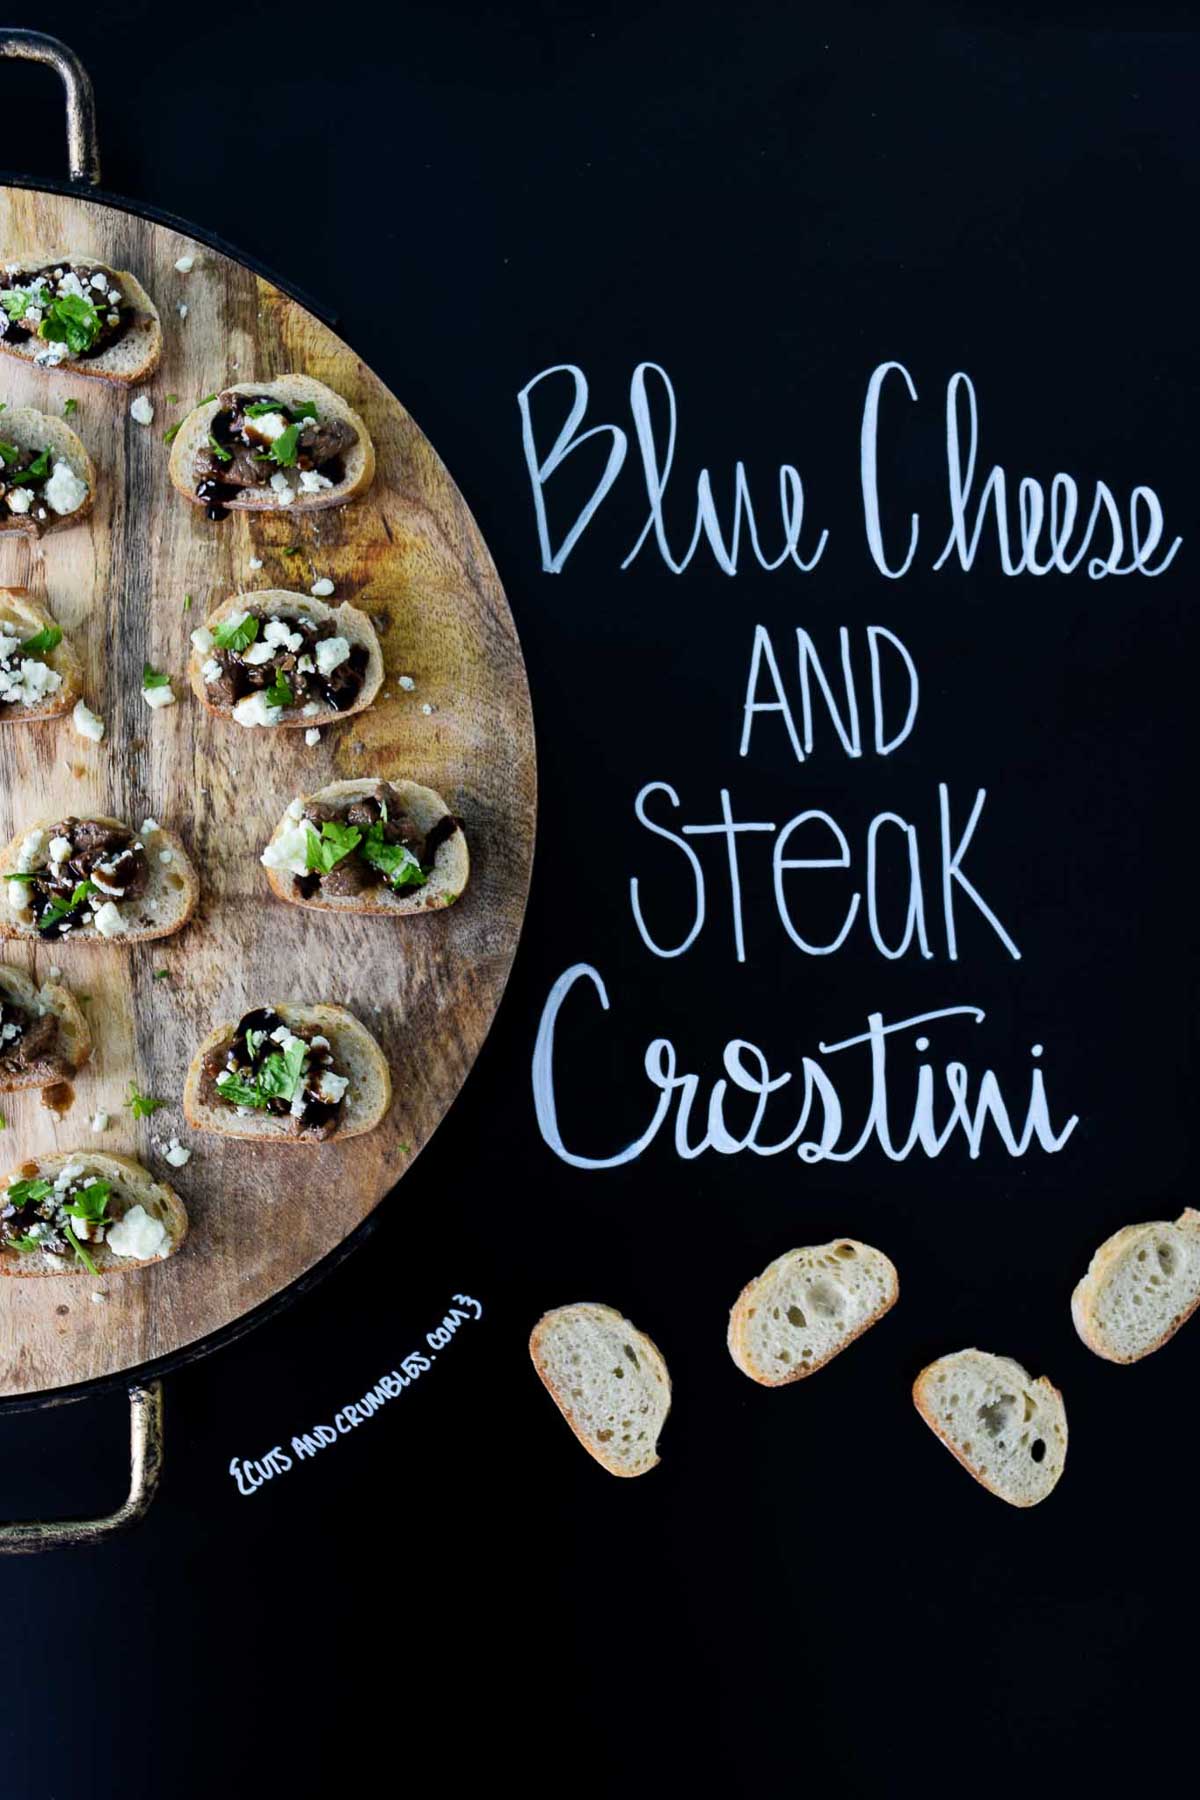 Blue Cheese and Steak Crostini on wooden platter with title written on chalkboard